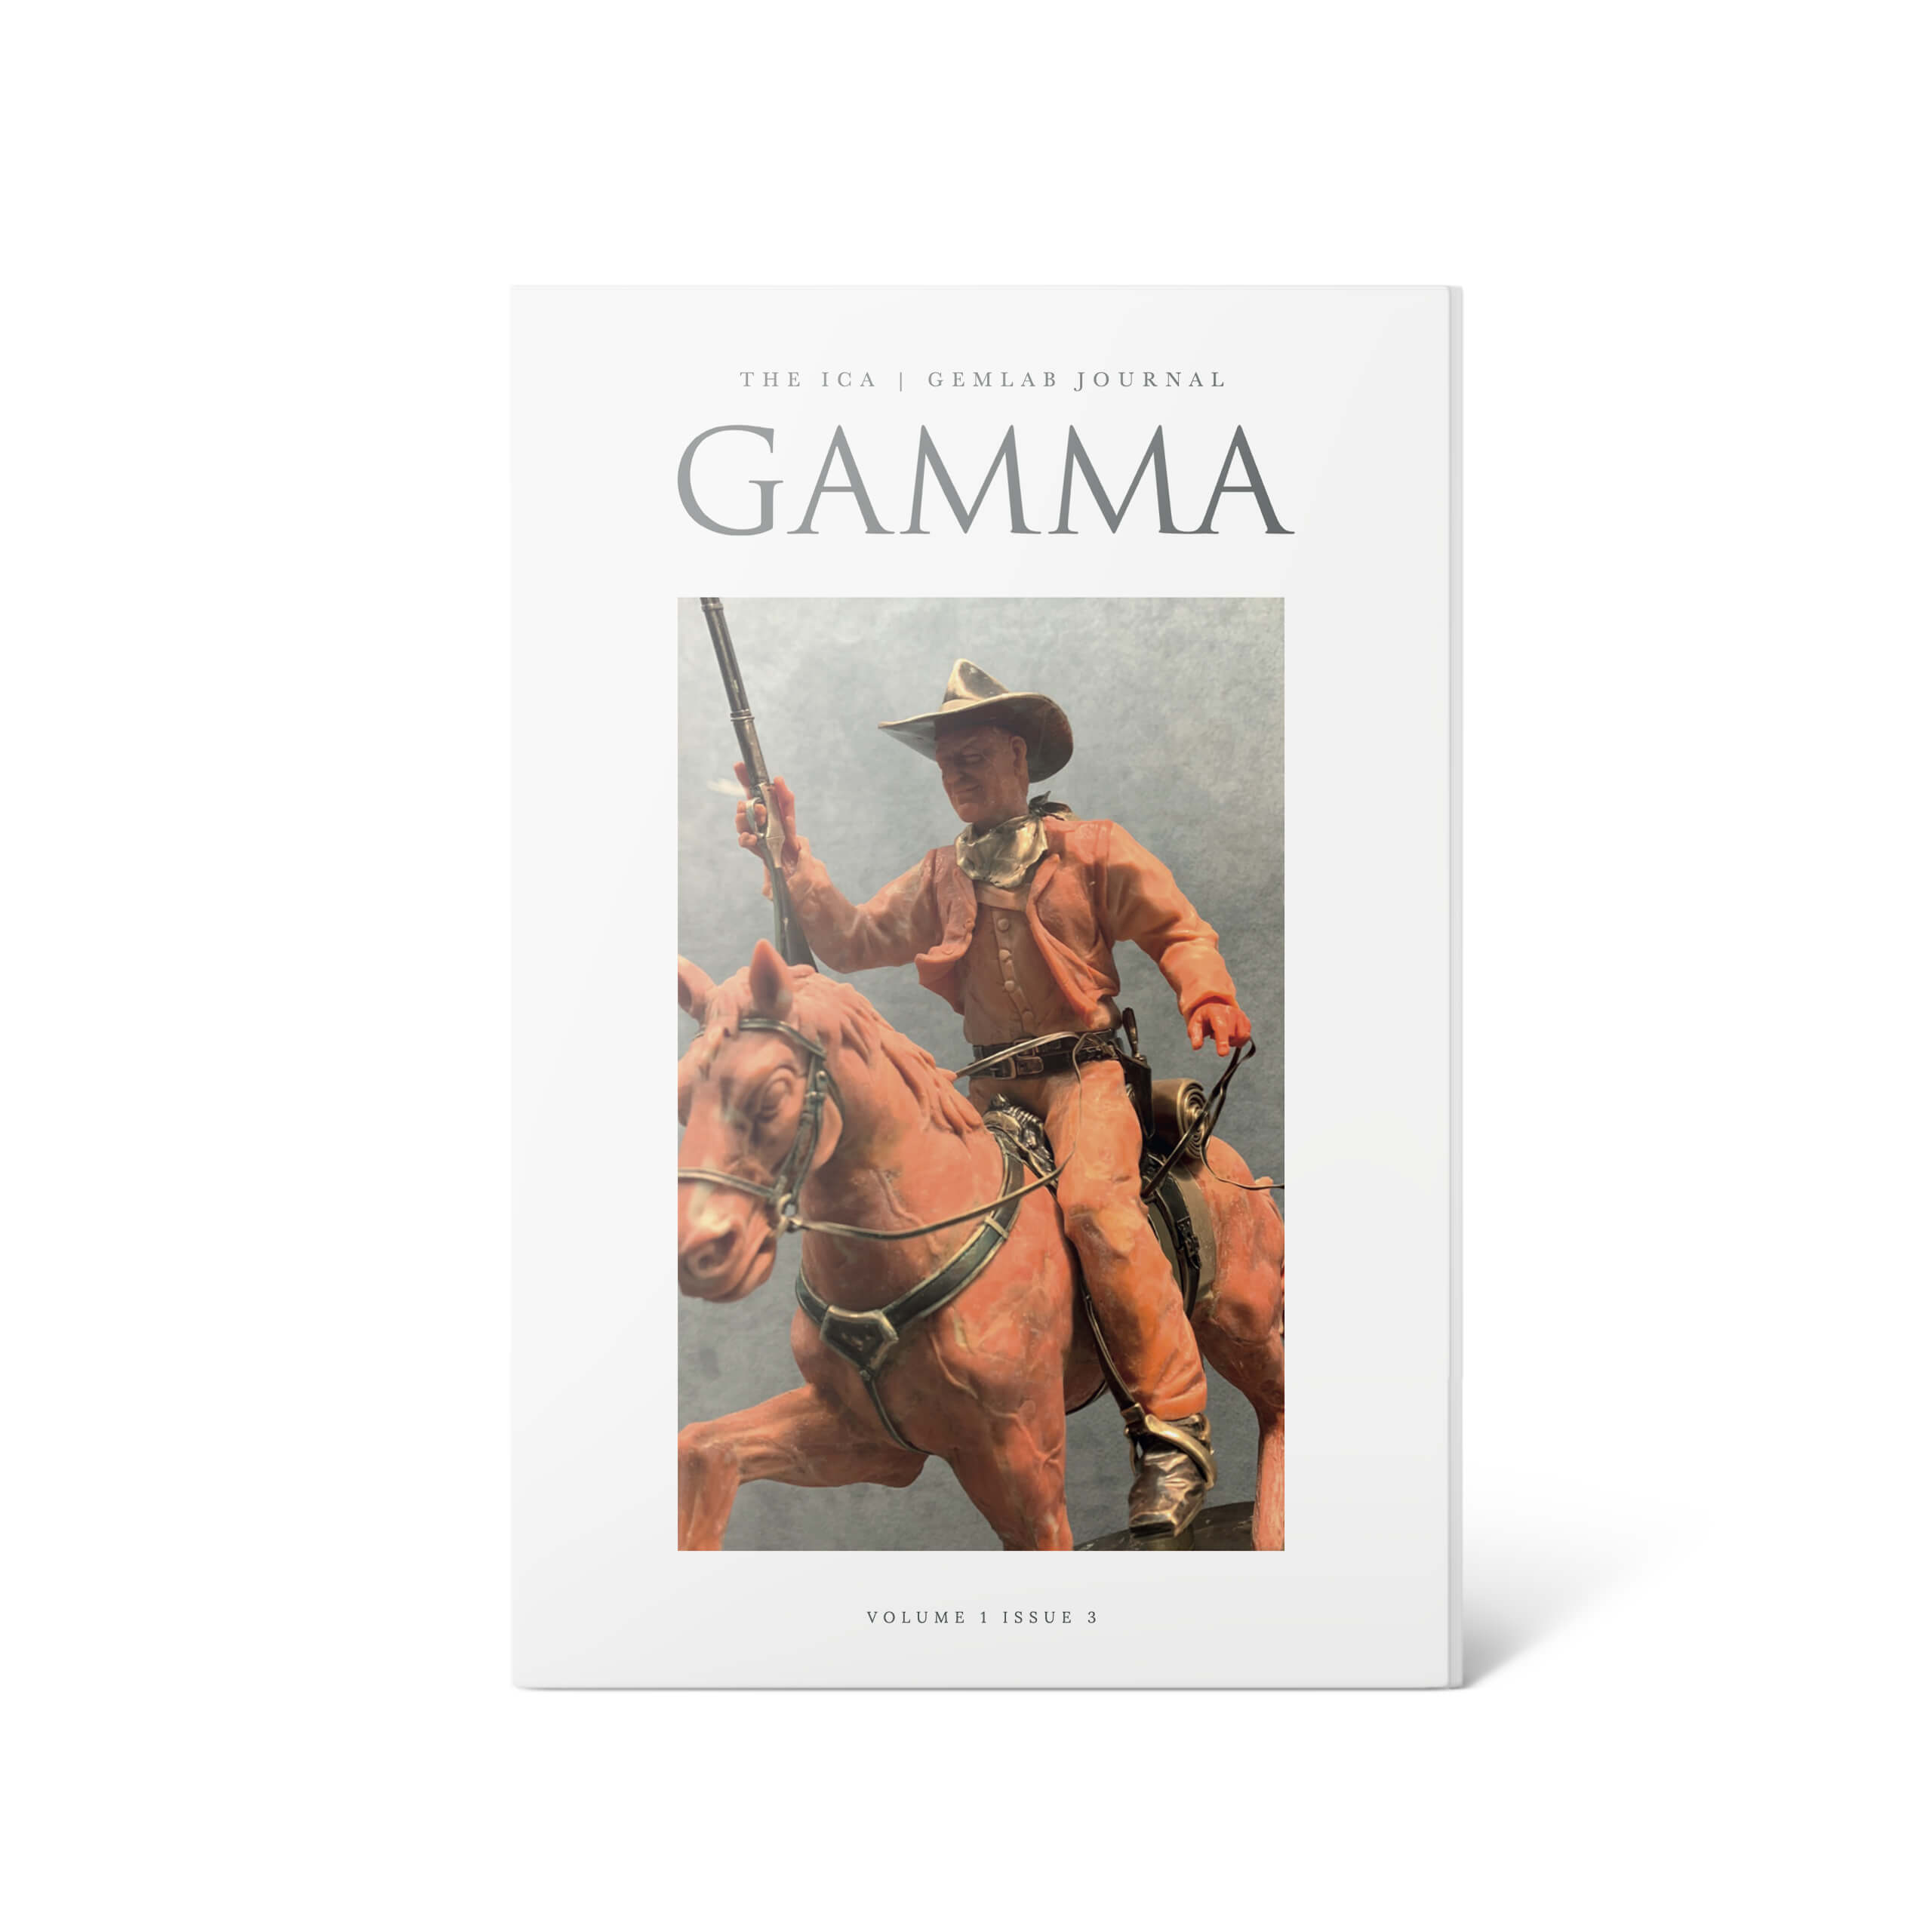 Gamma the ICA GemLab Gemmological journal. Volume 1 issue 3. On our cover Cover picture – Carving in Coral depicting John Wayne the American actor famous, amongst other roles, for his wild west movies. On display in the Liverino Coral Museum in Torre del Greco